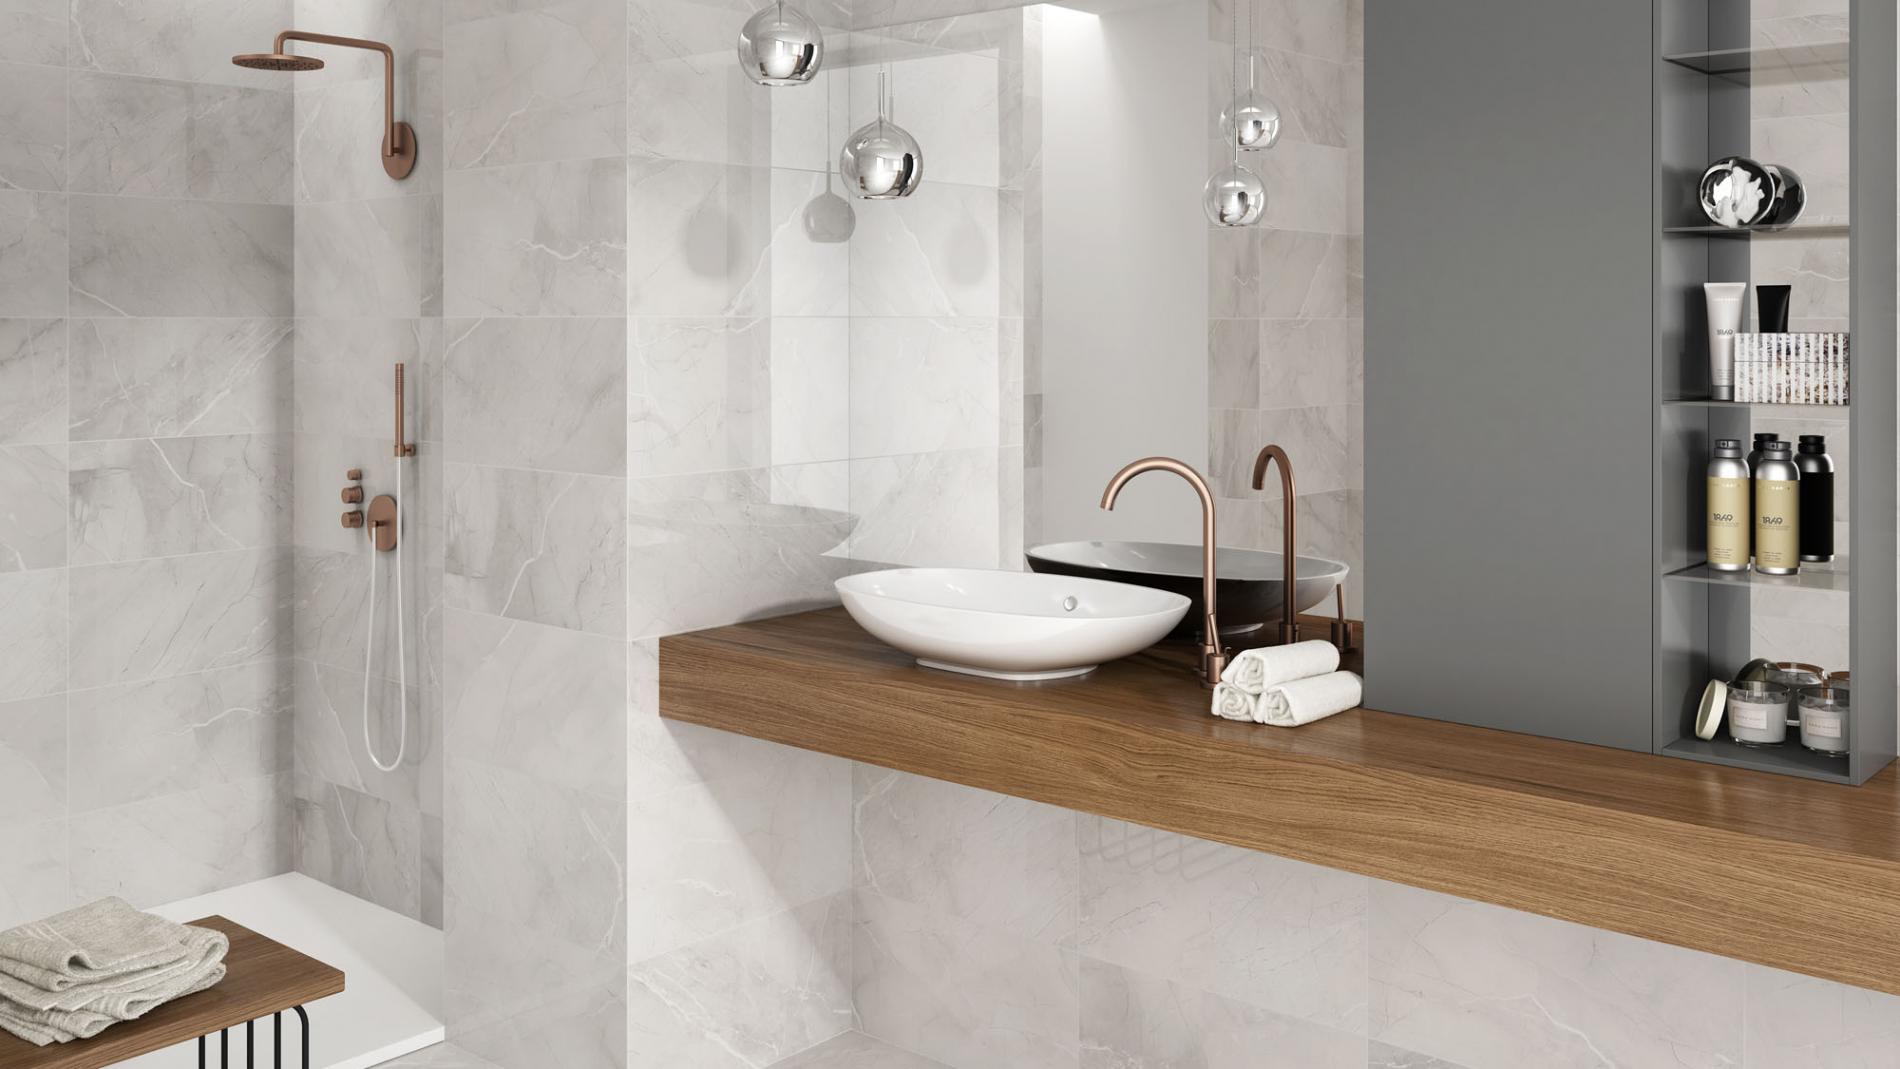 pam1900x169 Tiles dublin waterloo bathrooms commercial contracts ireland supply and fit luxury.jpg